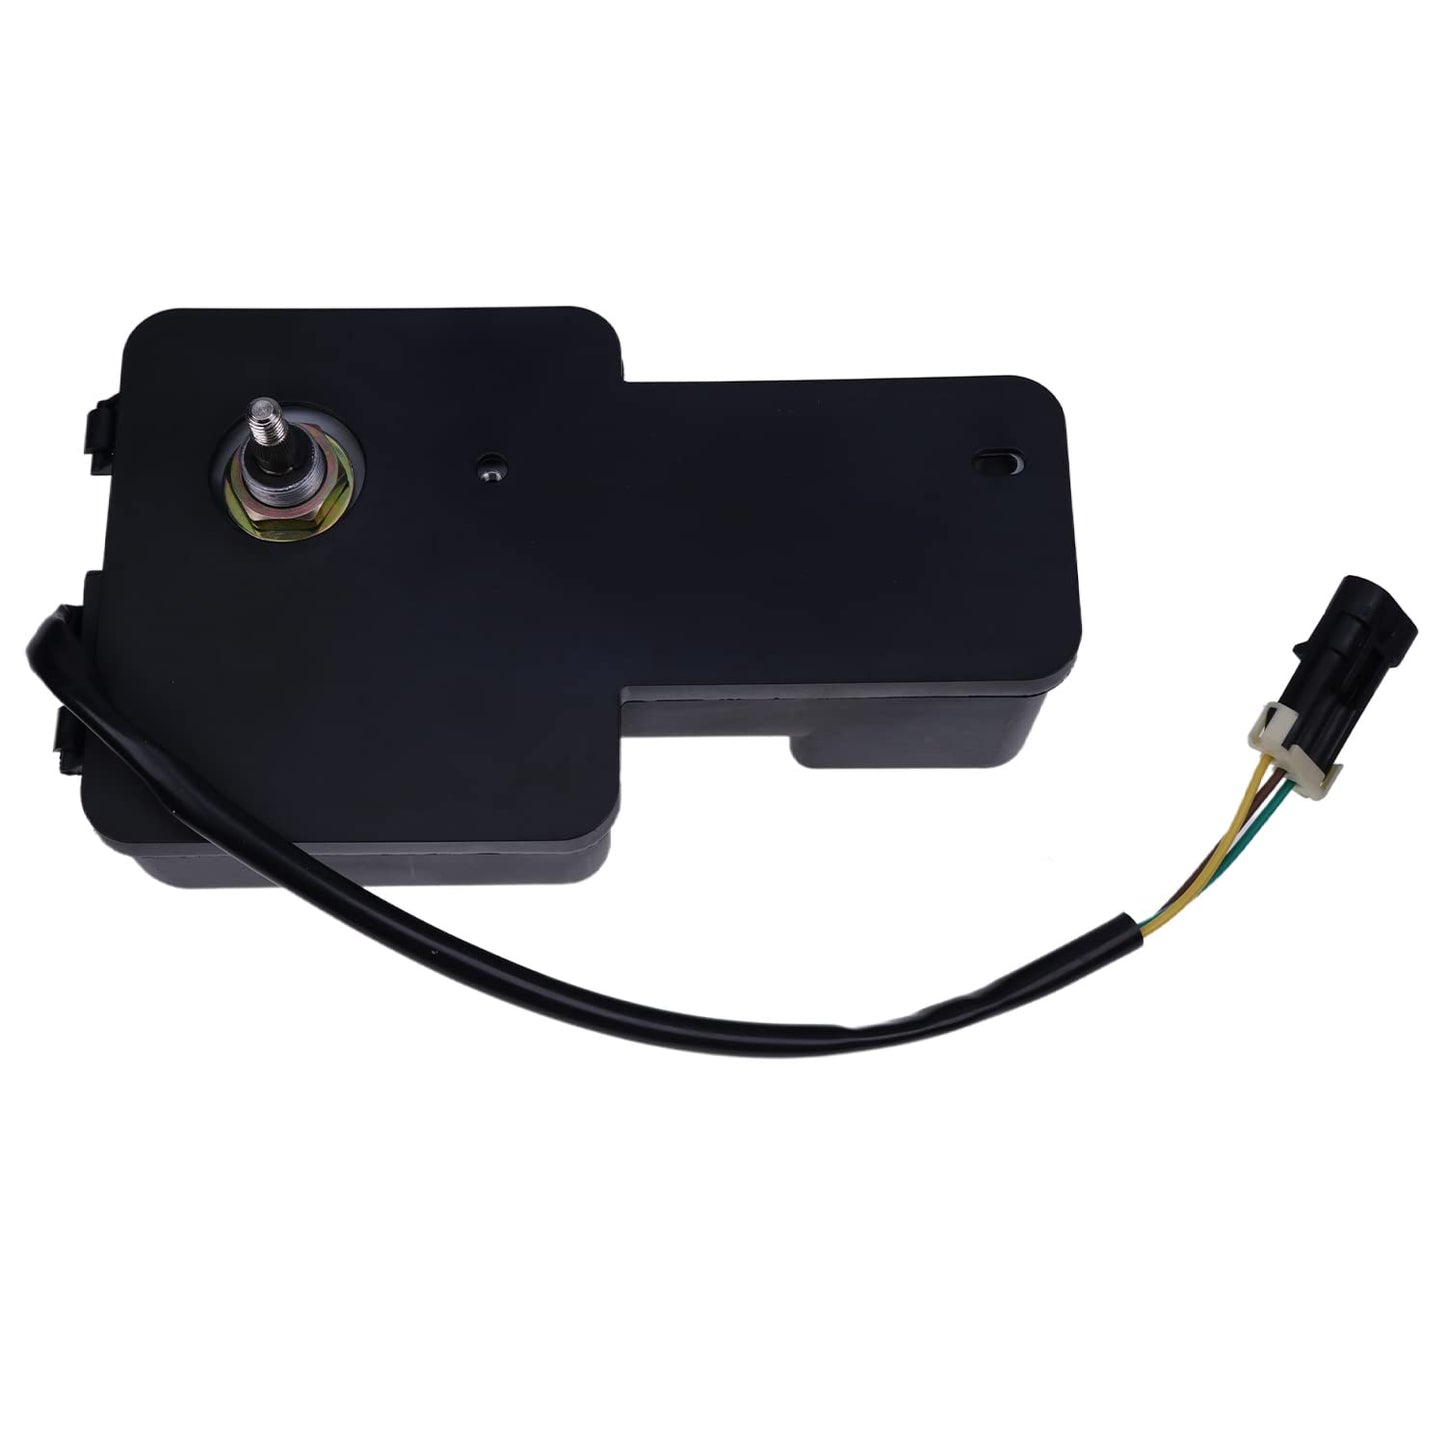 New 6679476 Wiper Motor Compatible with Bobcat S100 S130 S150 T190 T200 T300 963 7753 A250 Skid Steer Loader